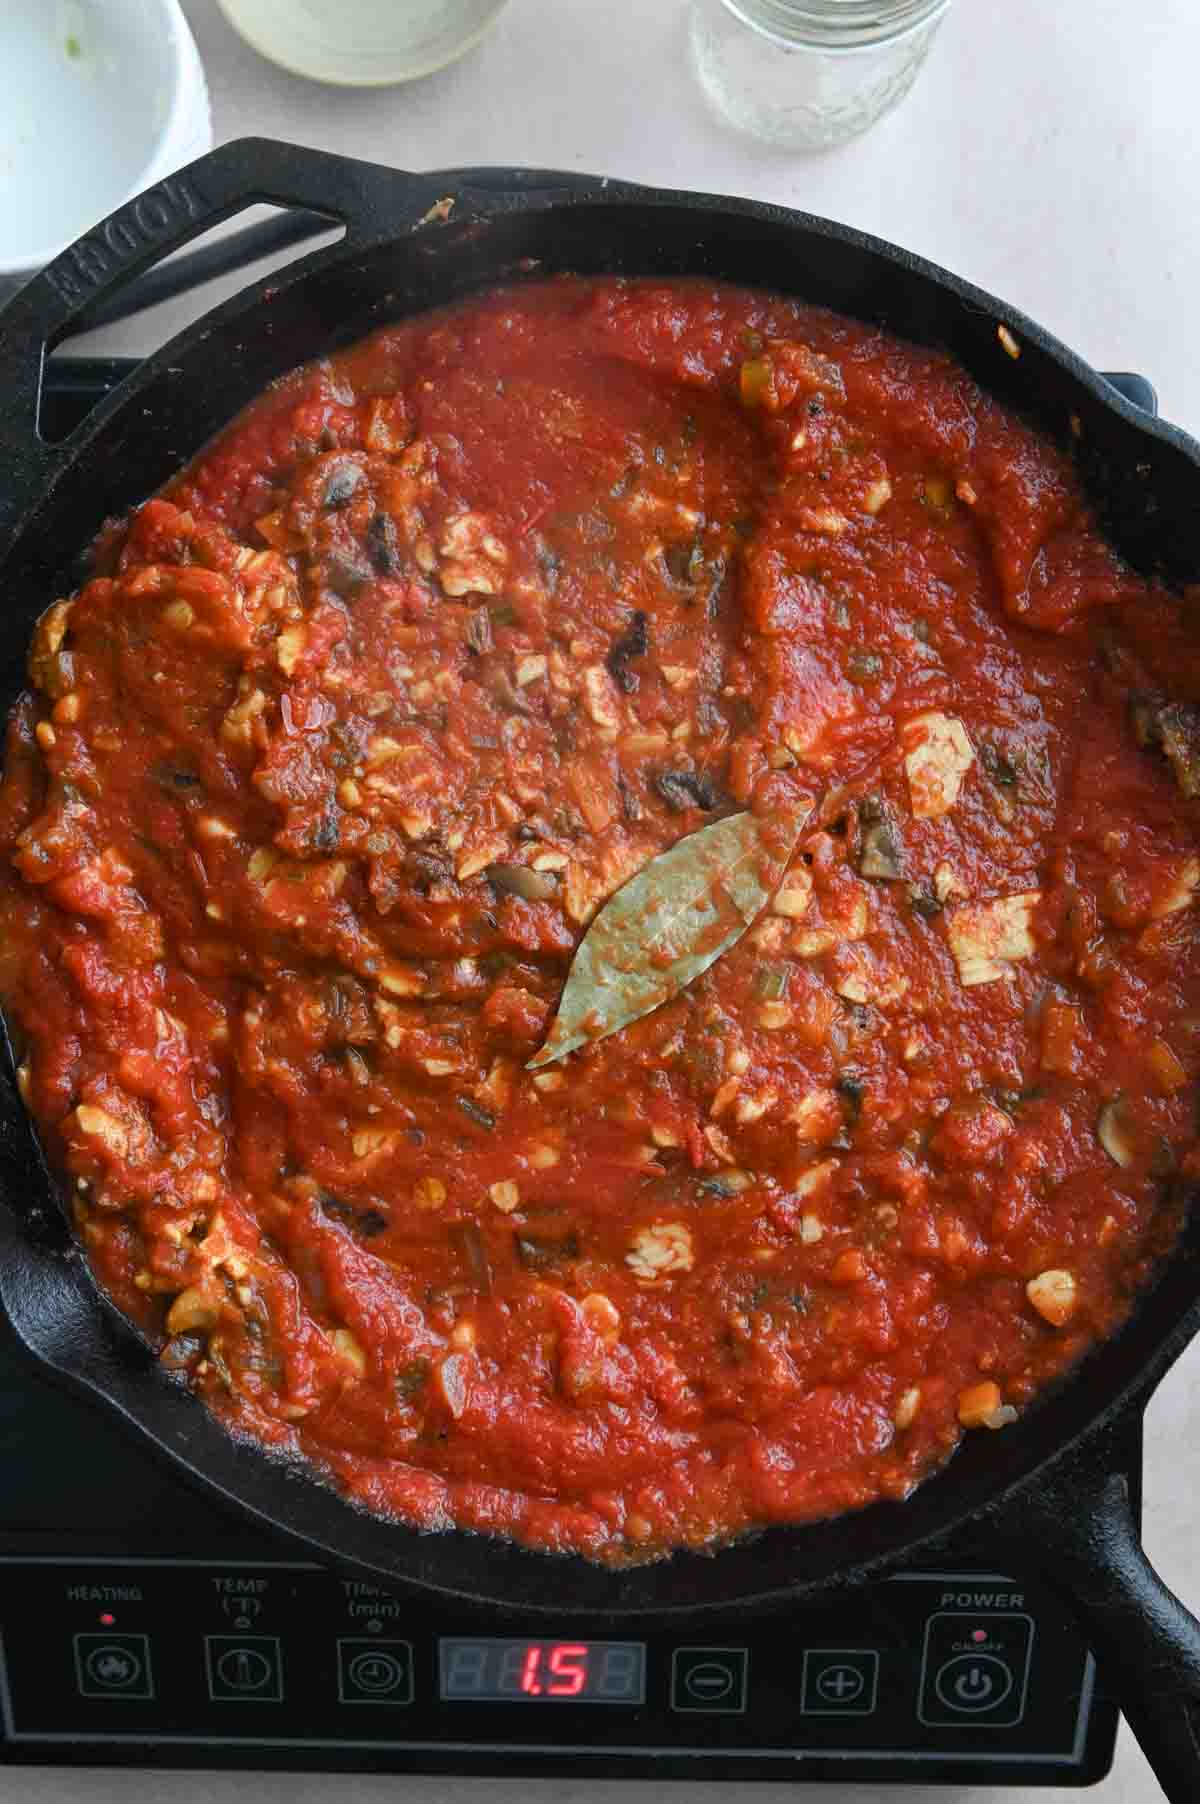 Tomato sauce topped with bay leaf in a cast iron skillet.